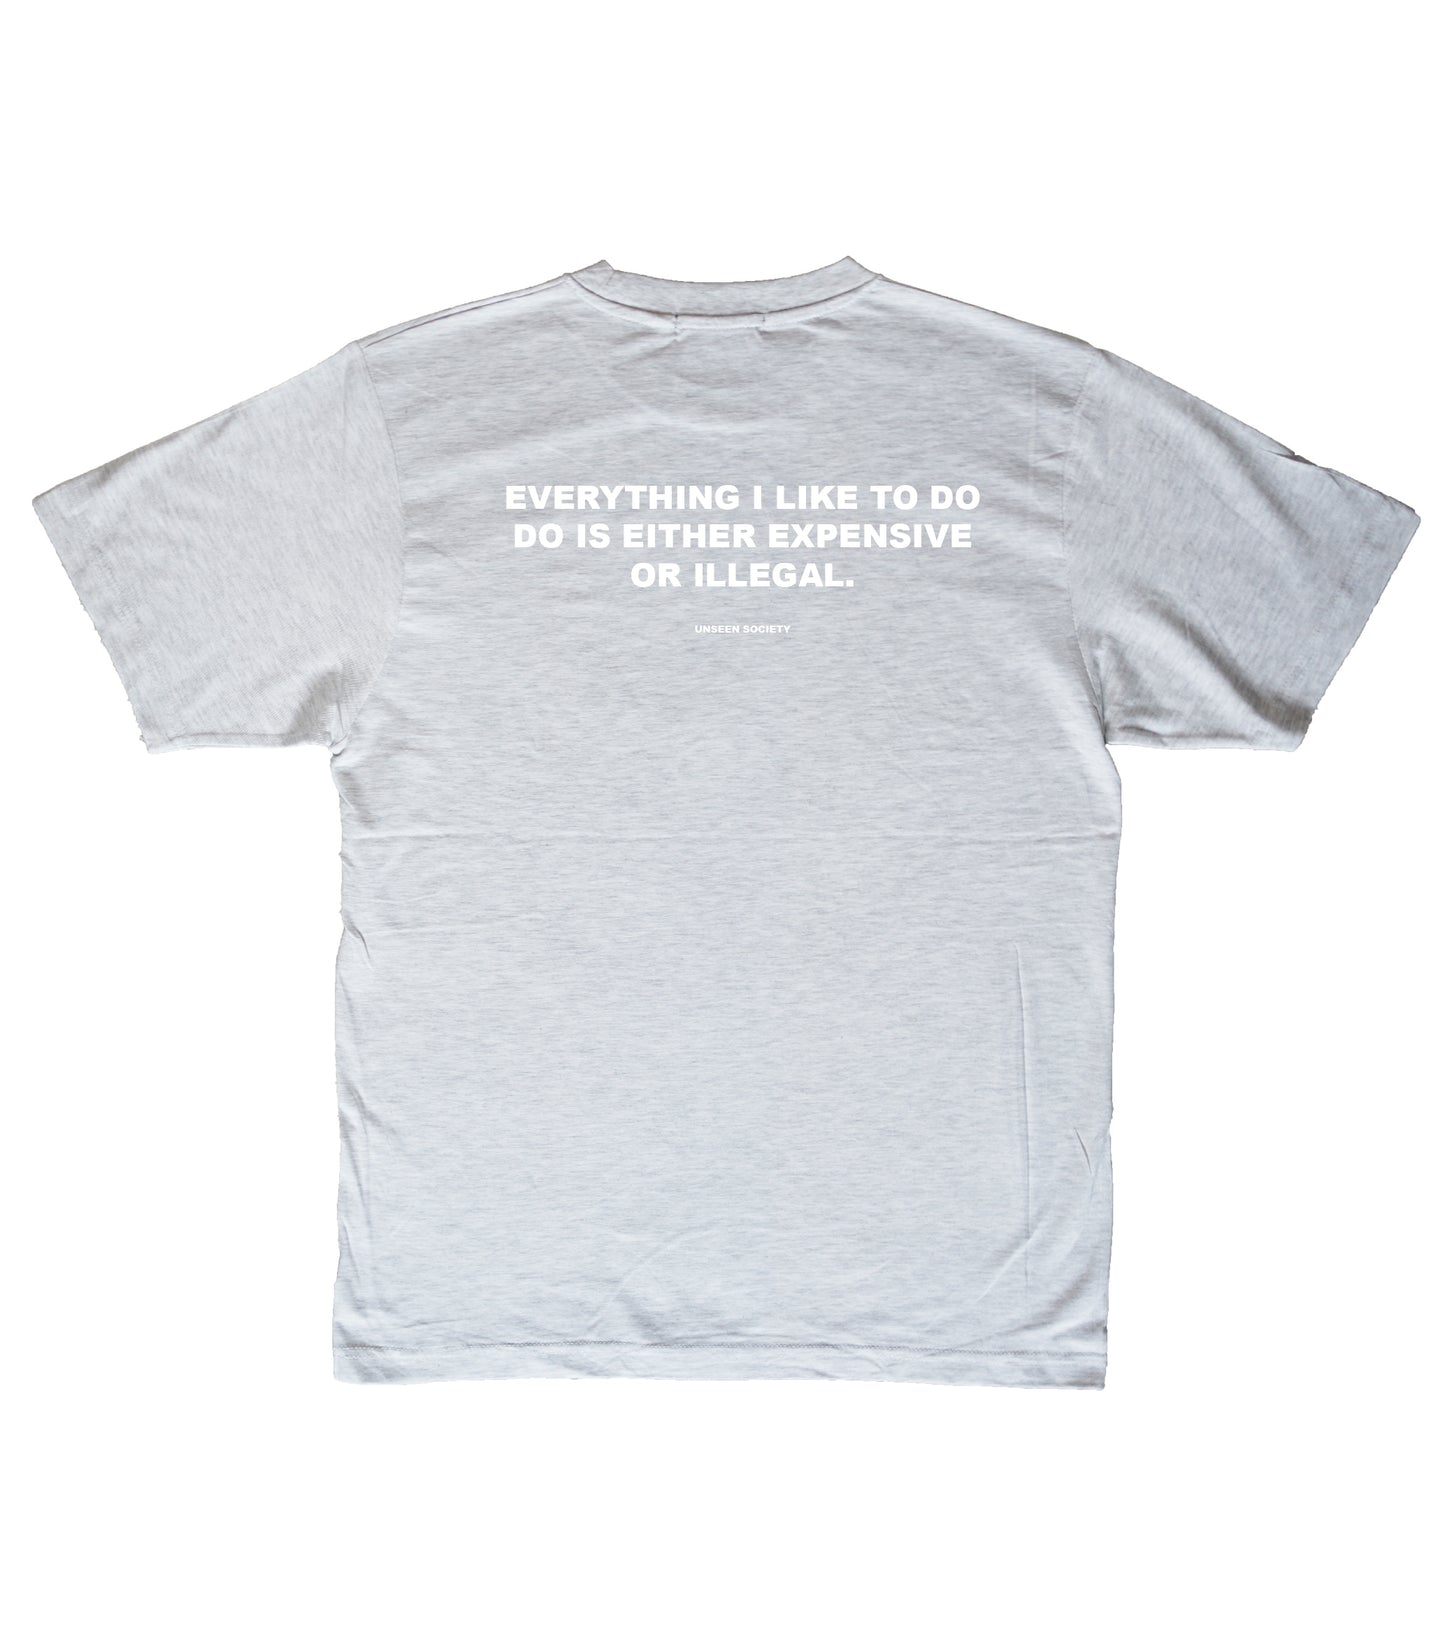 Expensive or illegal quote tee